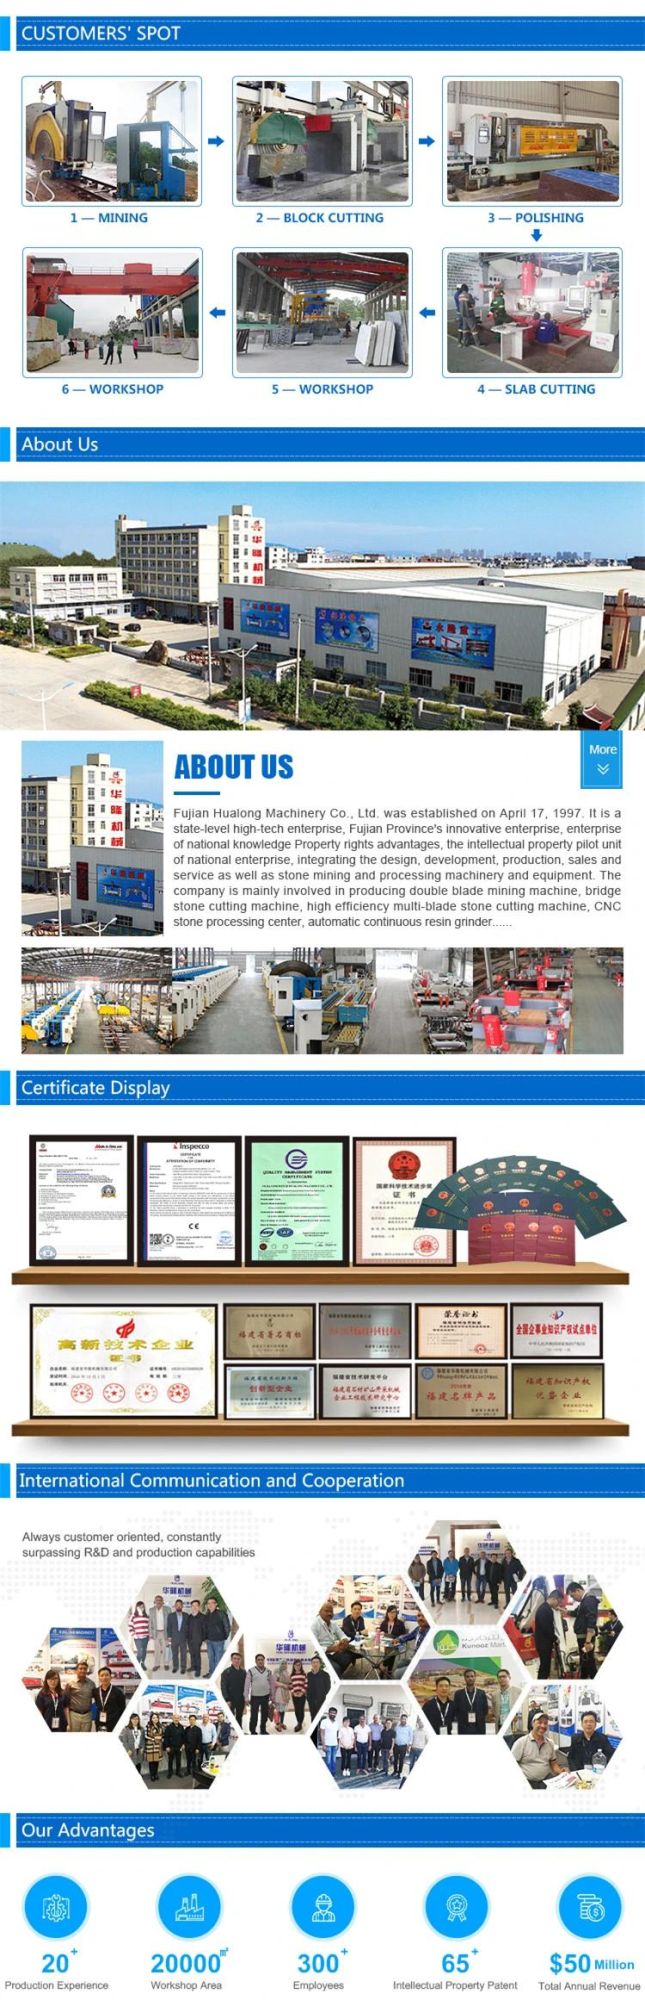 Hualong Machinery High Efficient Double Blade Stonecutter Quarry Mining Stone Machine